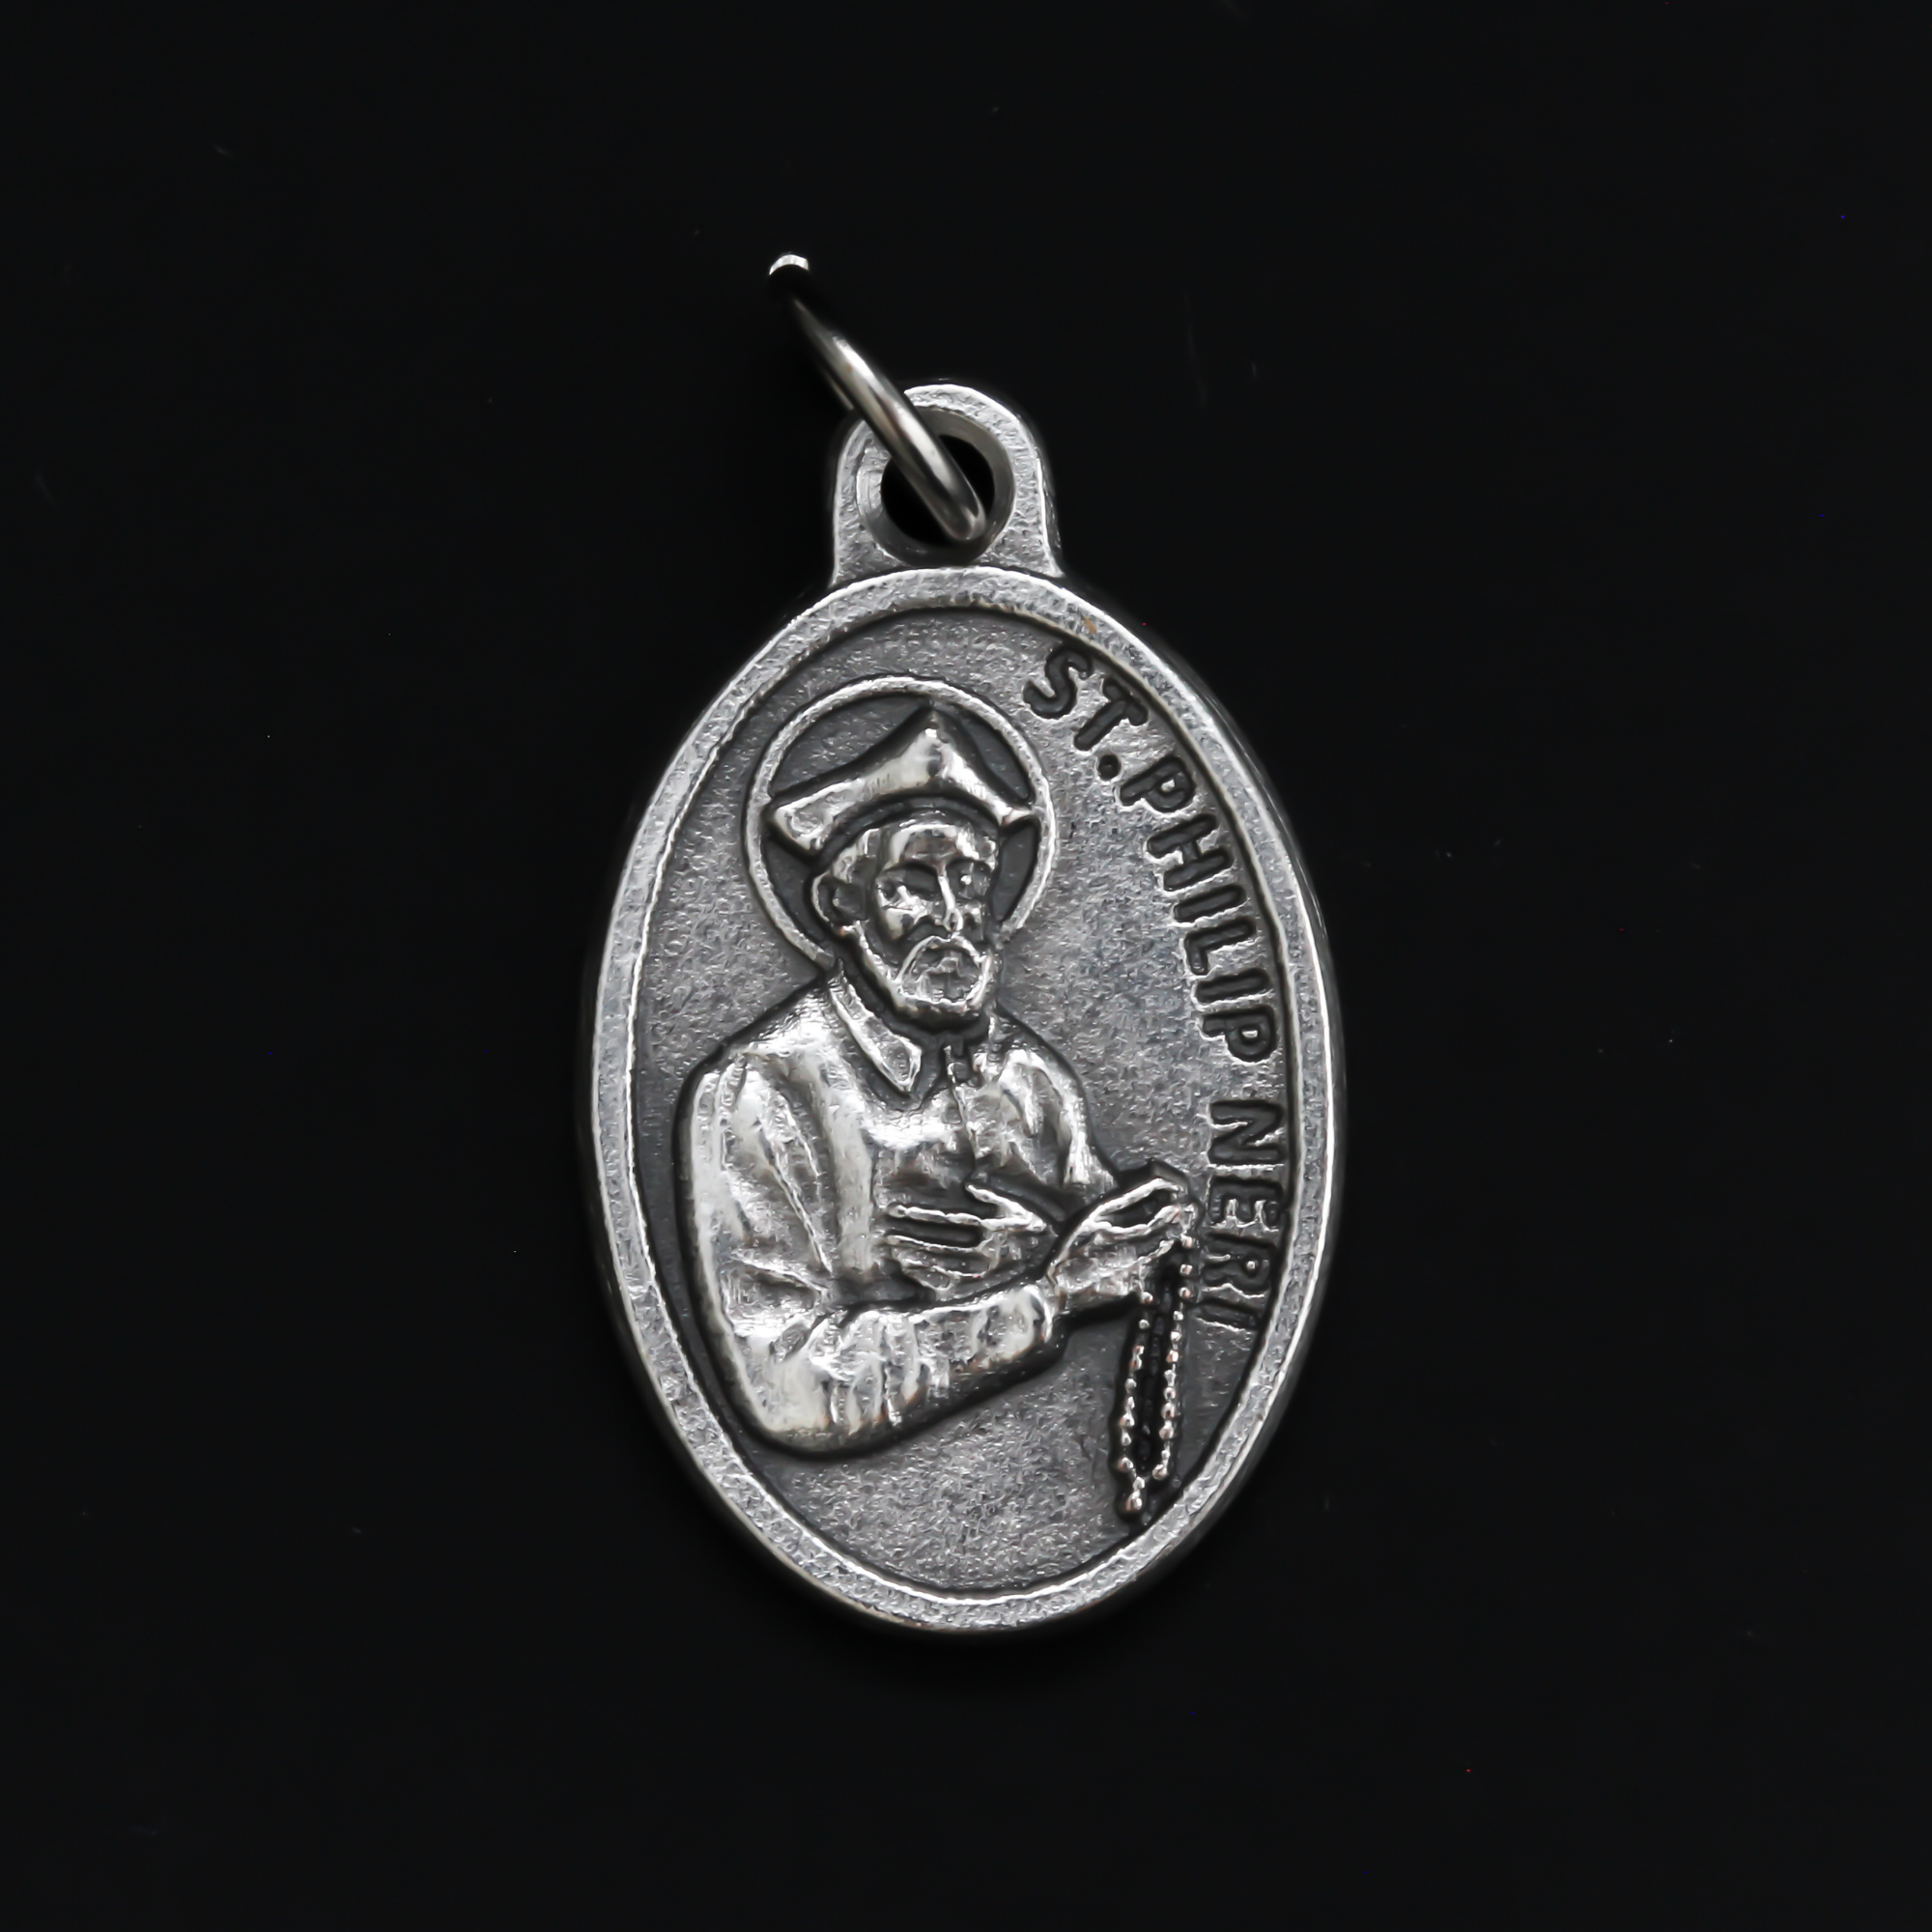 1" oval silver oxidized St. Philip Neri medal that depicts the saint on the front and Pray For Us on the back